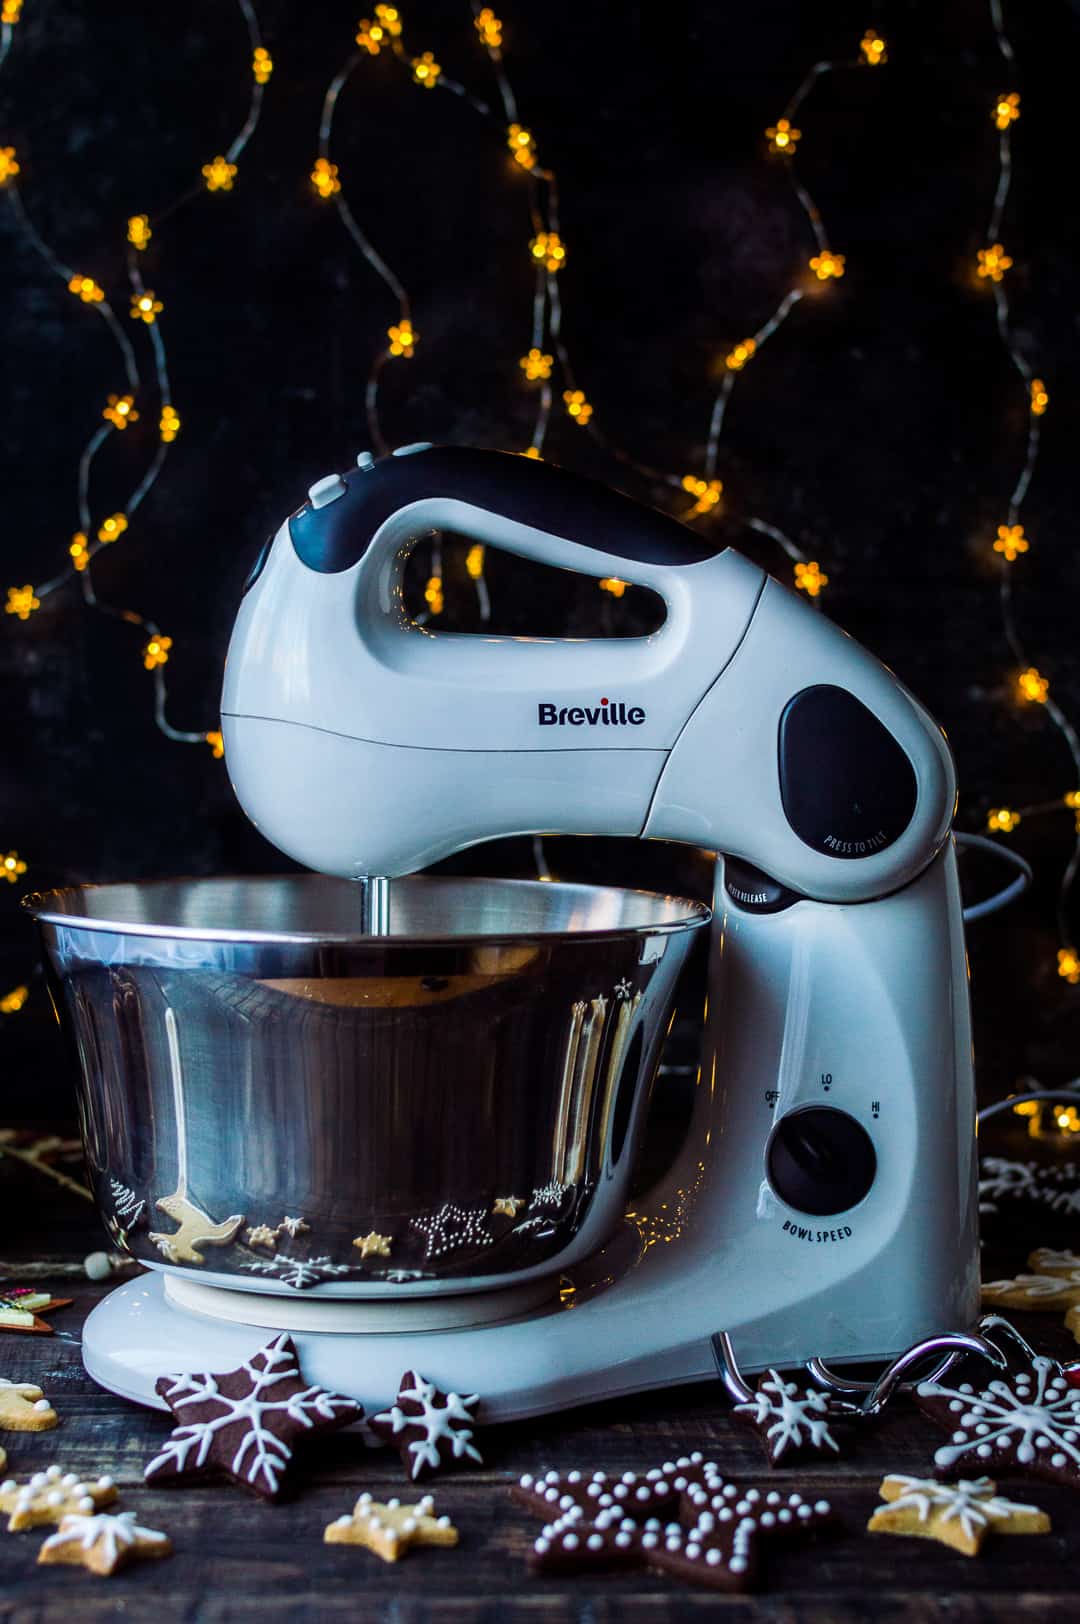 Breville stand and hand mixer